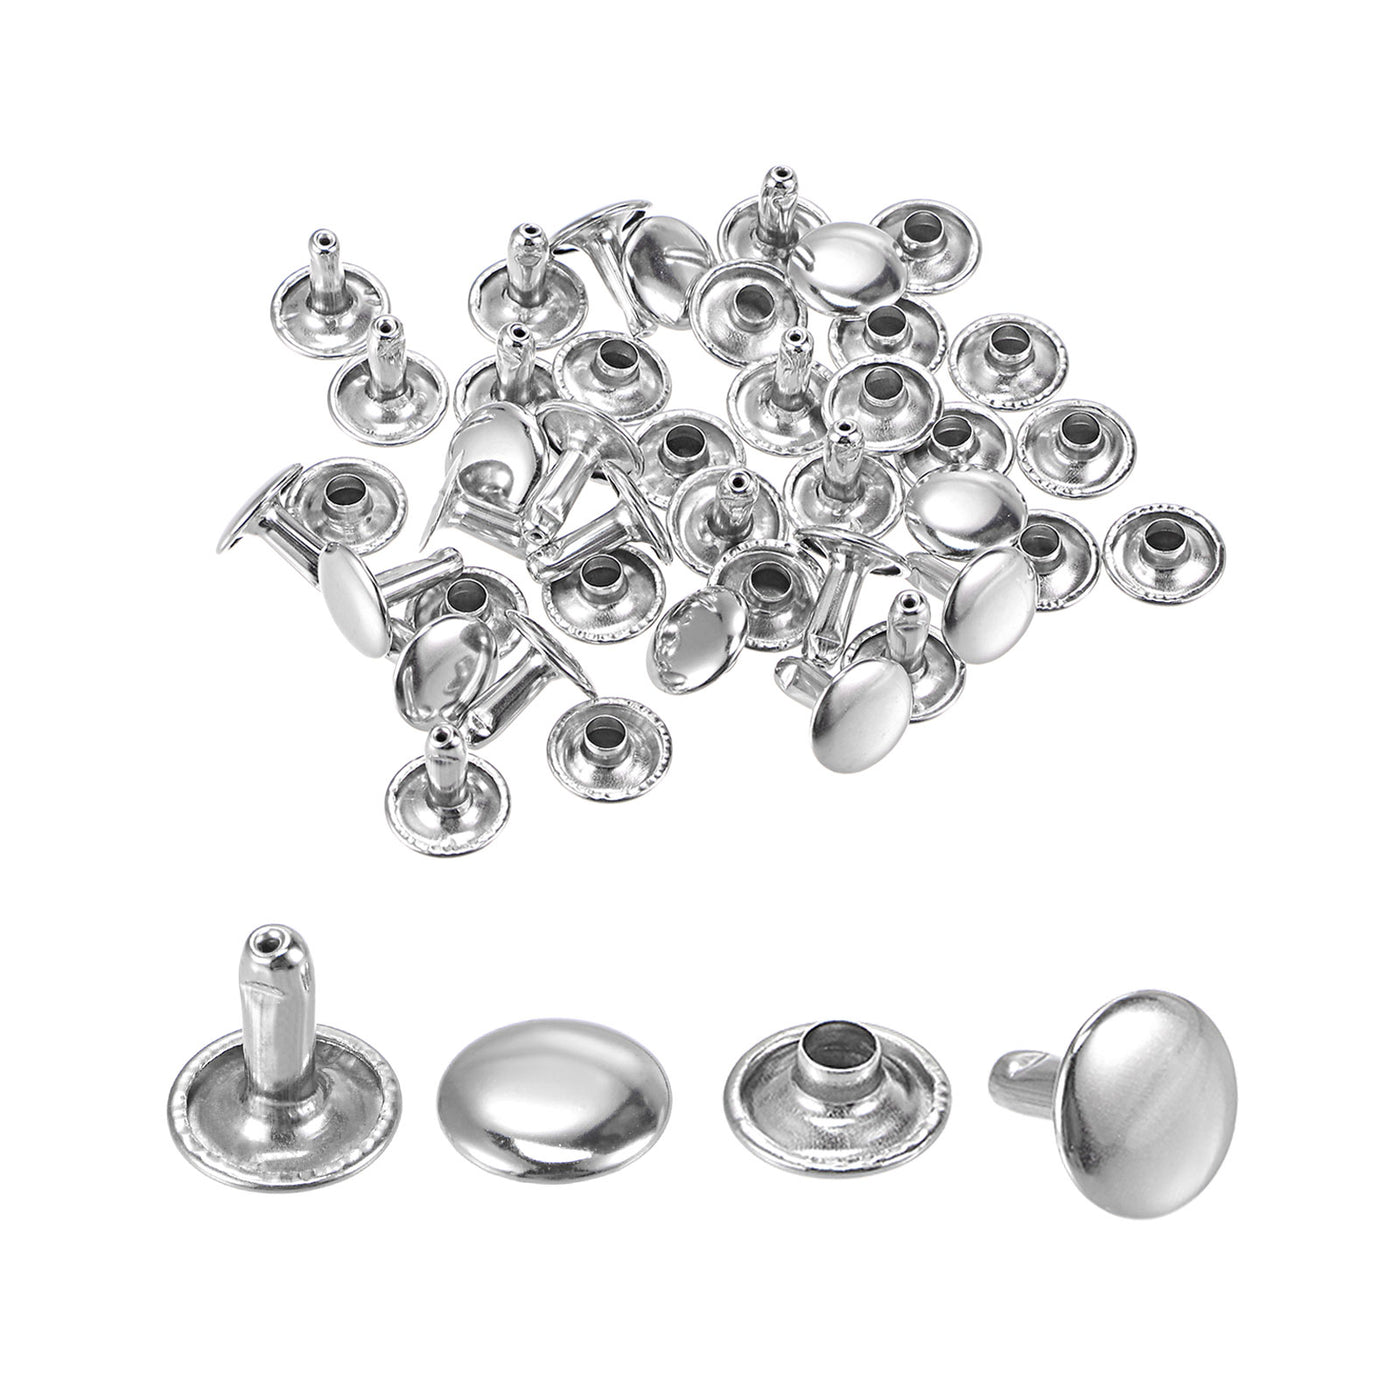 uxcell Uxcell 20 Sets Leather Rivets Silver Tone 10mm Double Cap Brass Rivet Leather Studs